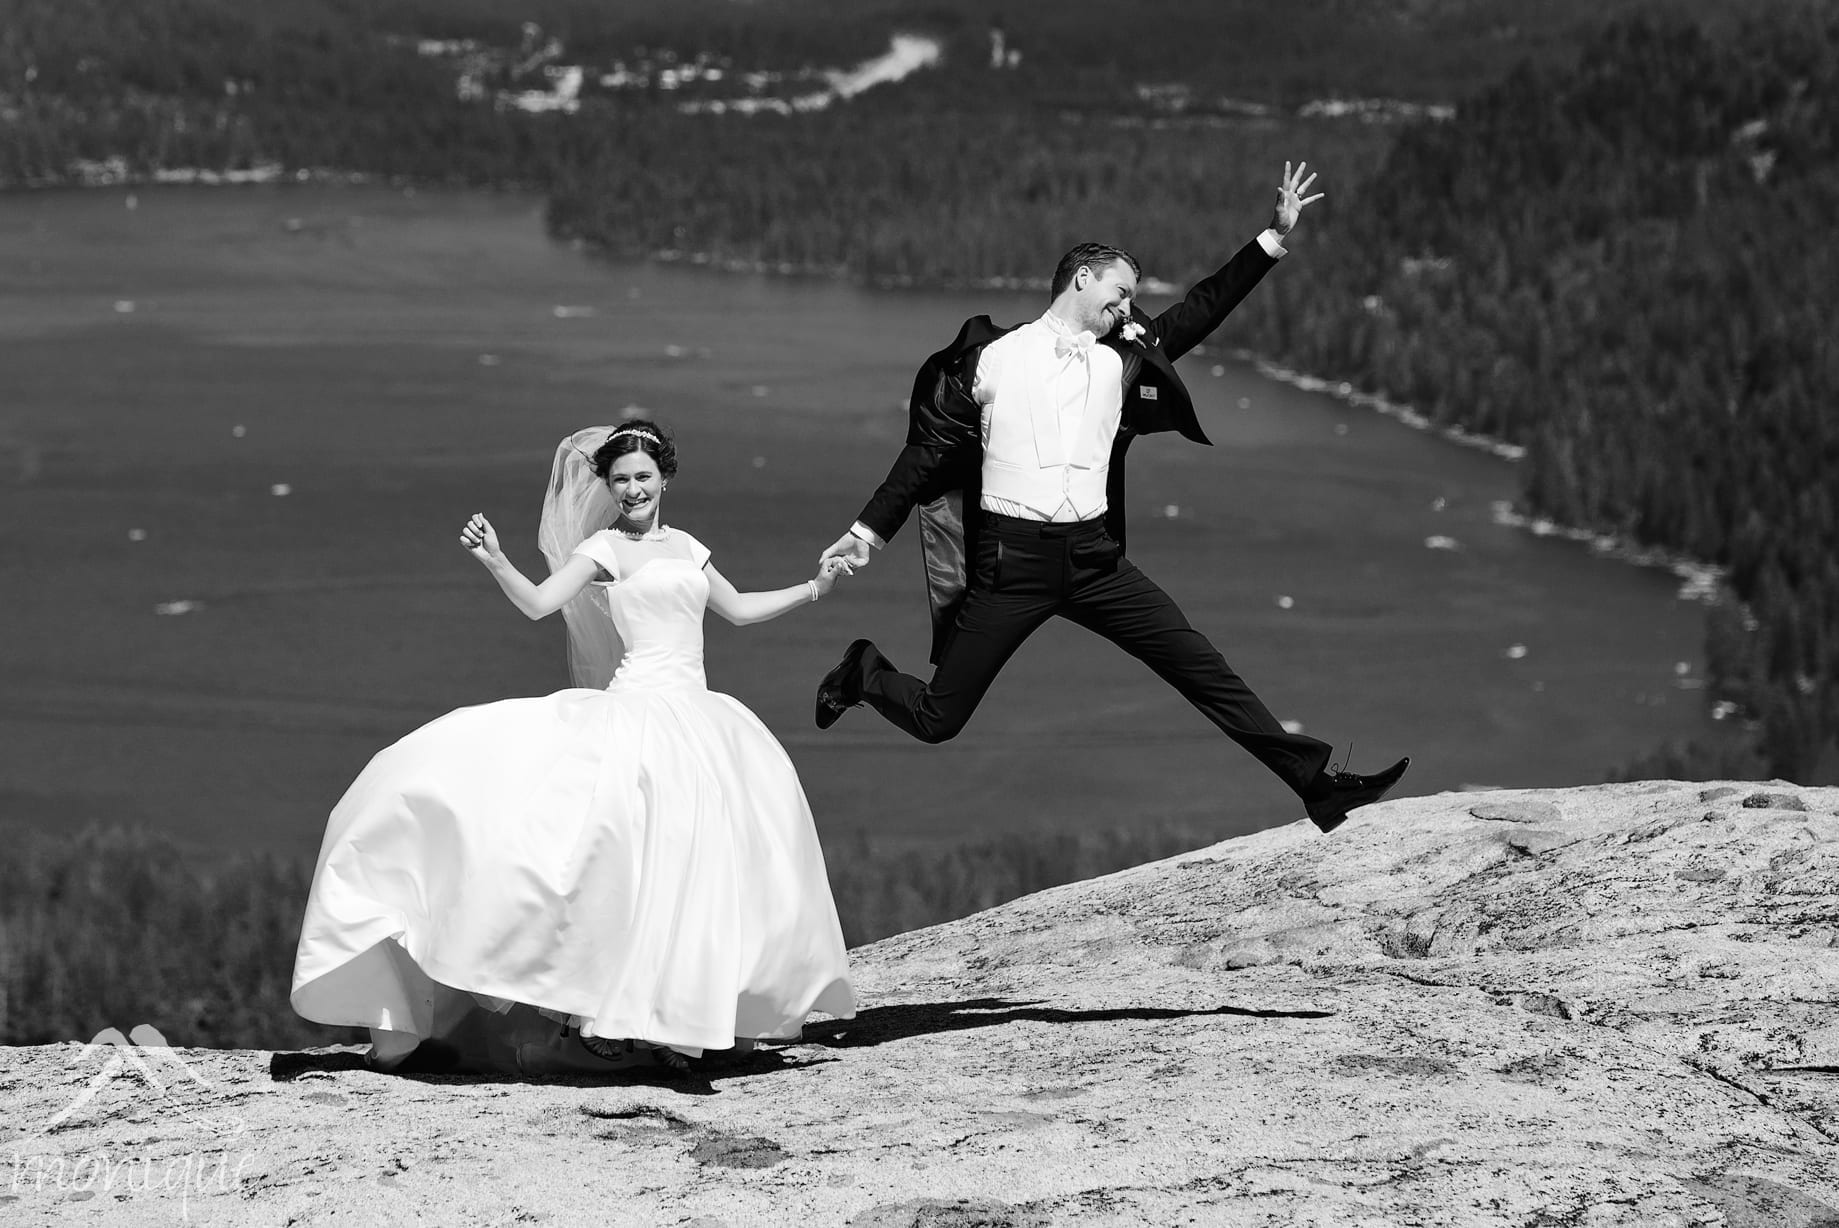 Sugar Bowl ski resort mountain top wedding in Truckee with the bride and groom overlooking Donner Lake by Photography by Monique